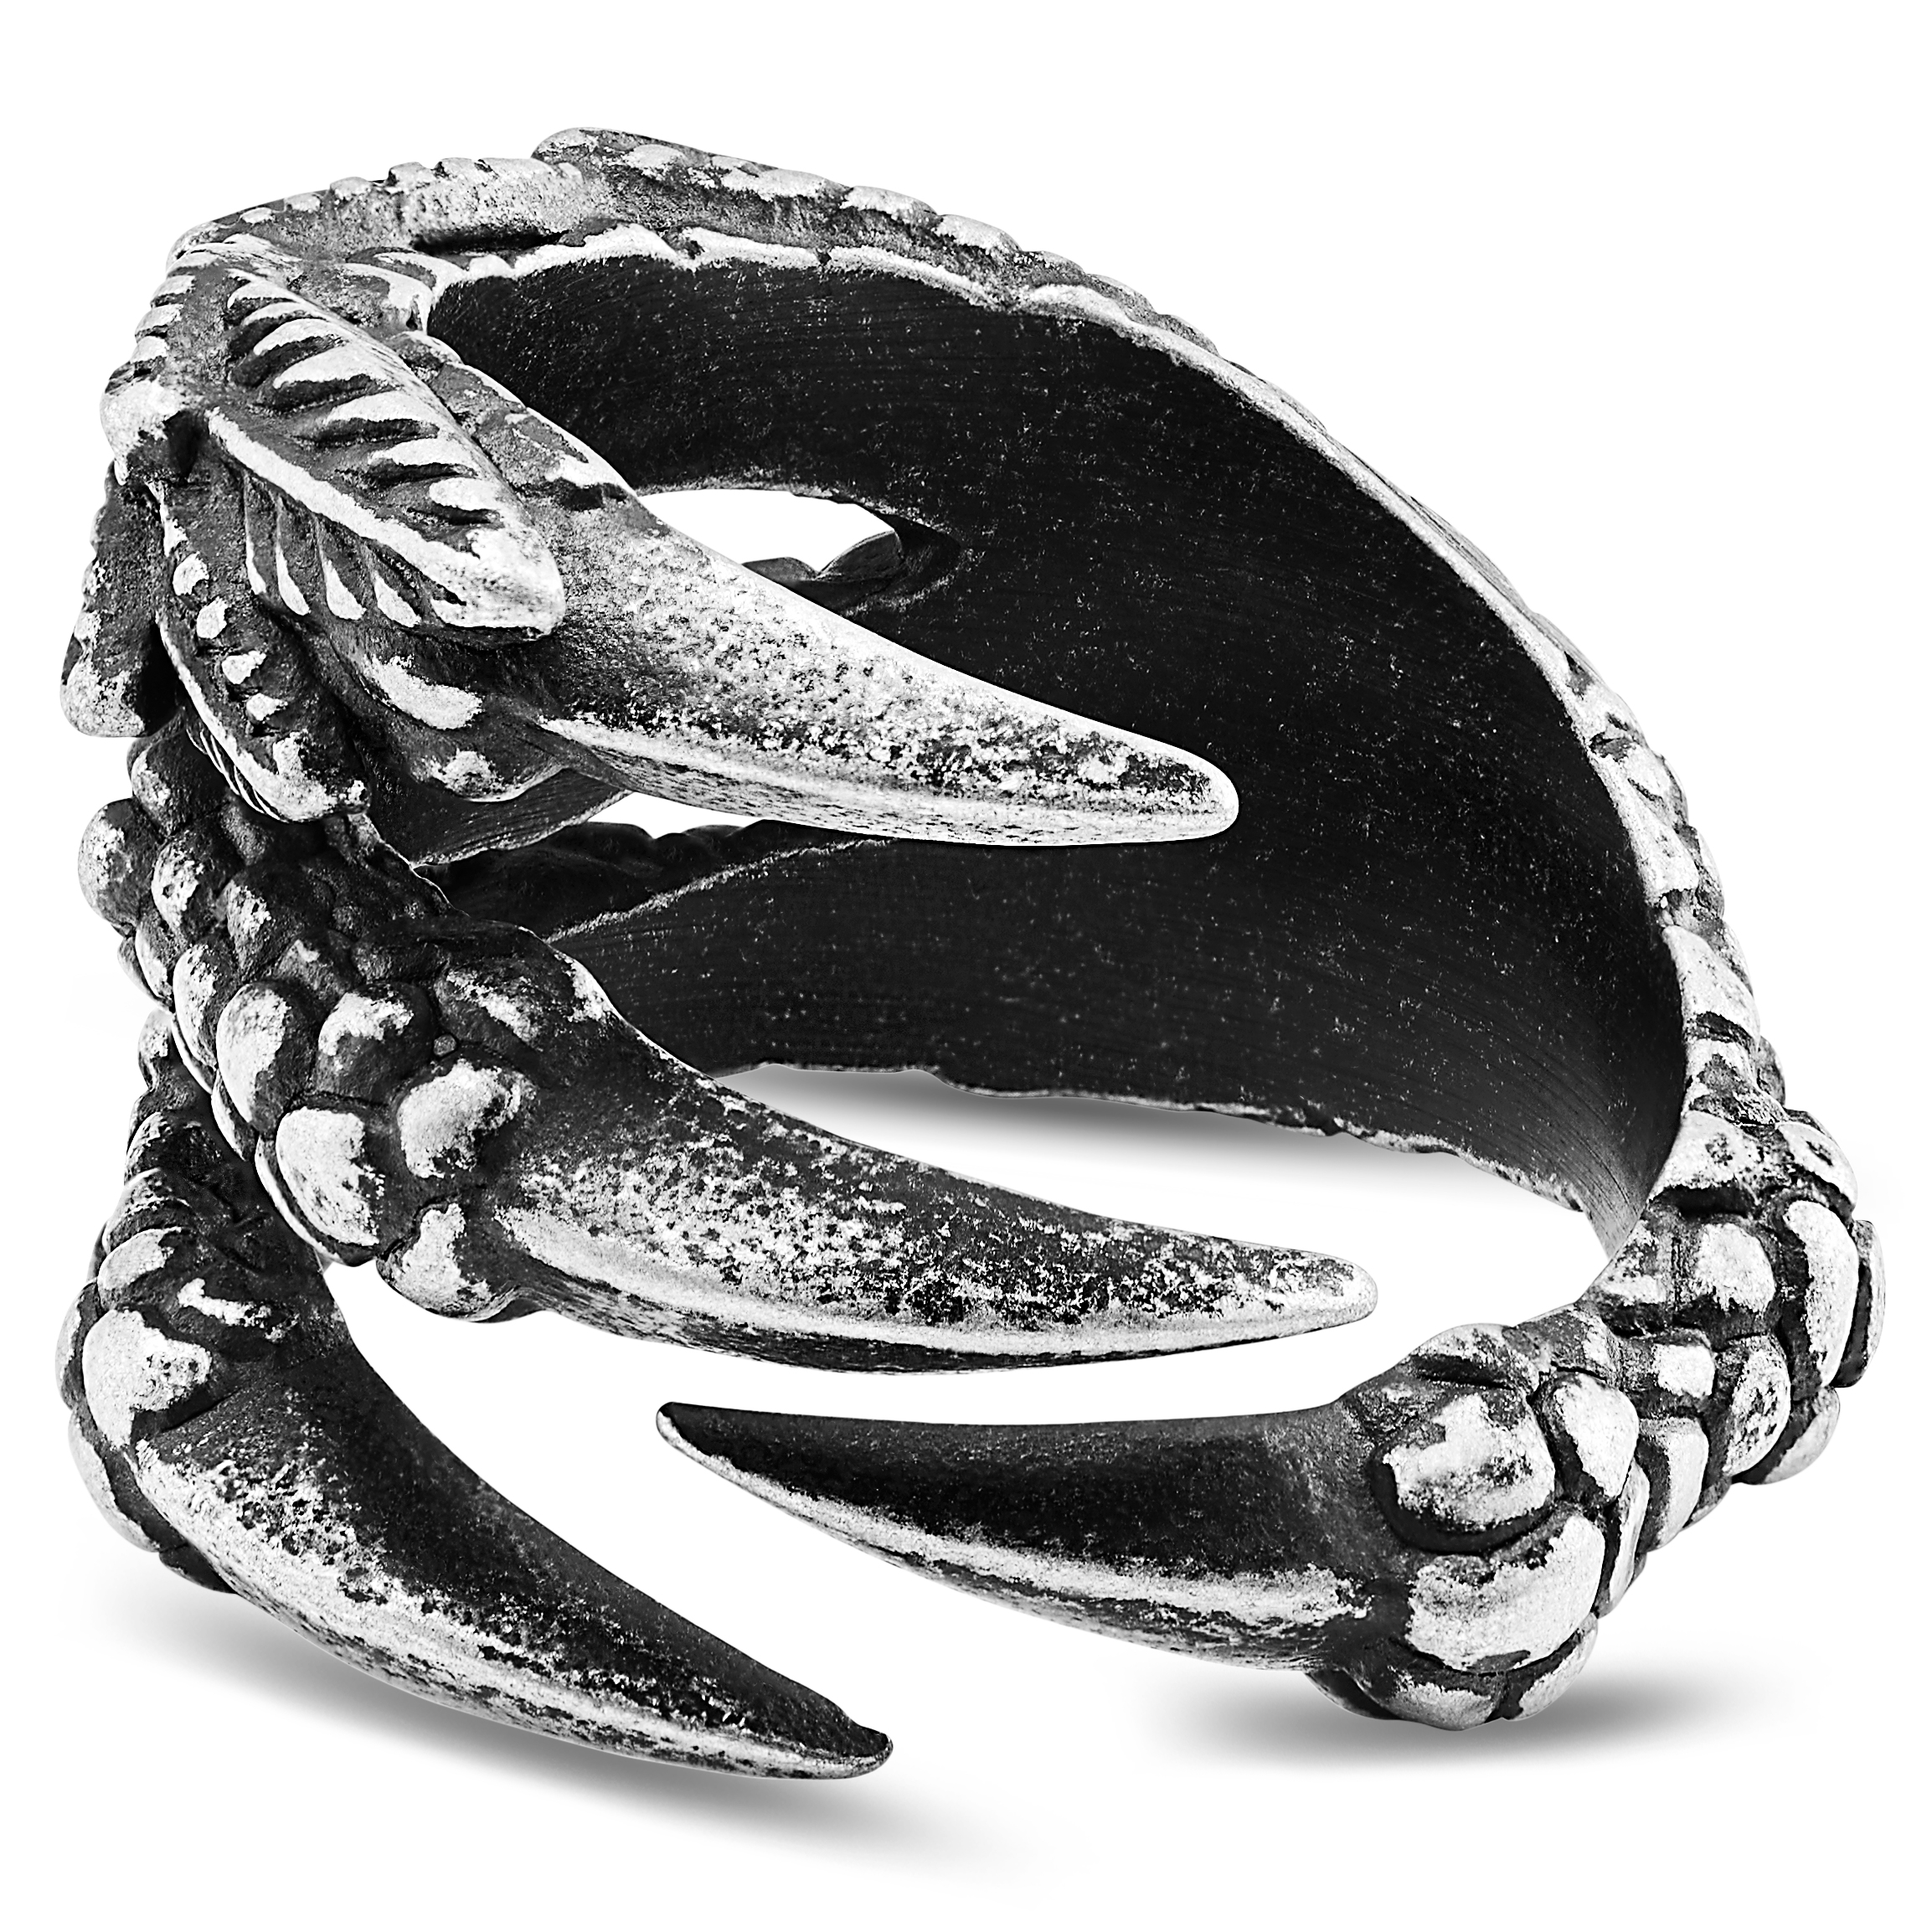 Punk Vintage Black Stone Rings Stainless Steel Gothic Dragon Claw Ring For  Man Dominating Biker Jewelry Gifts Dropshipping - Rings - AliExpress